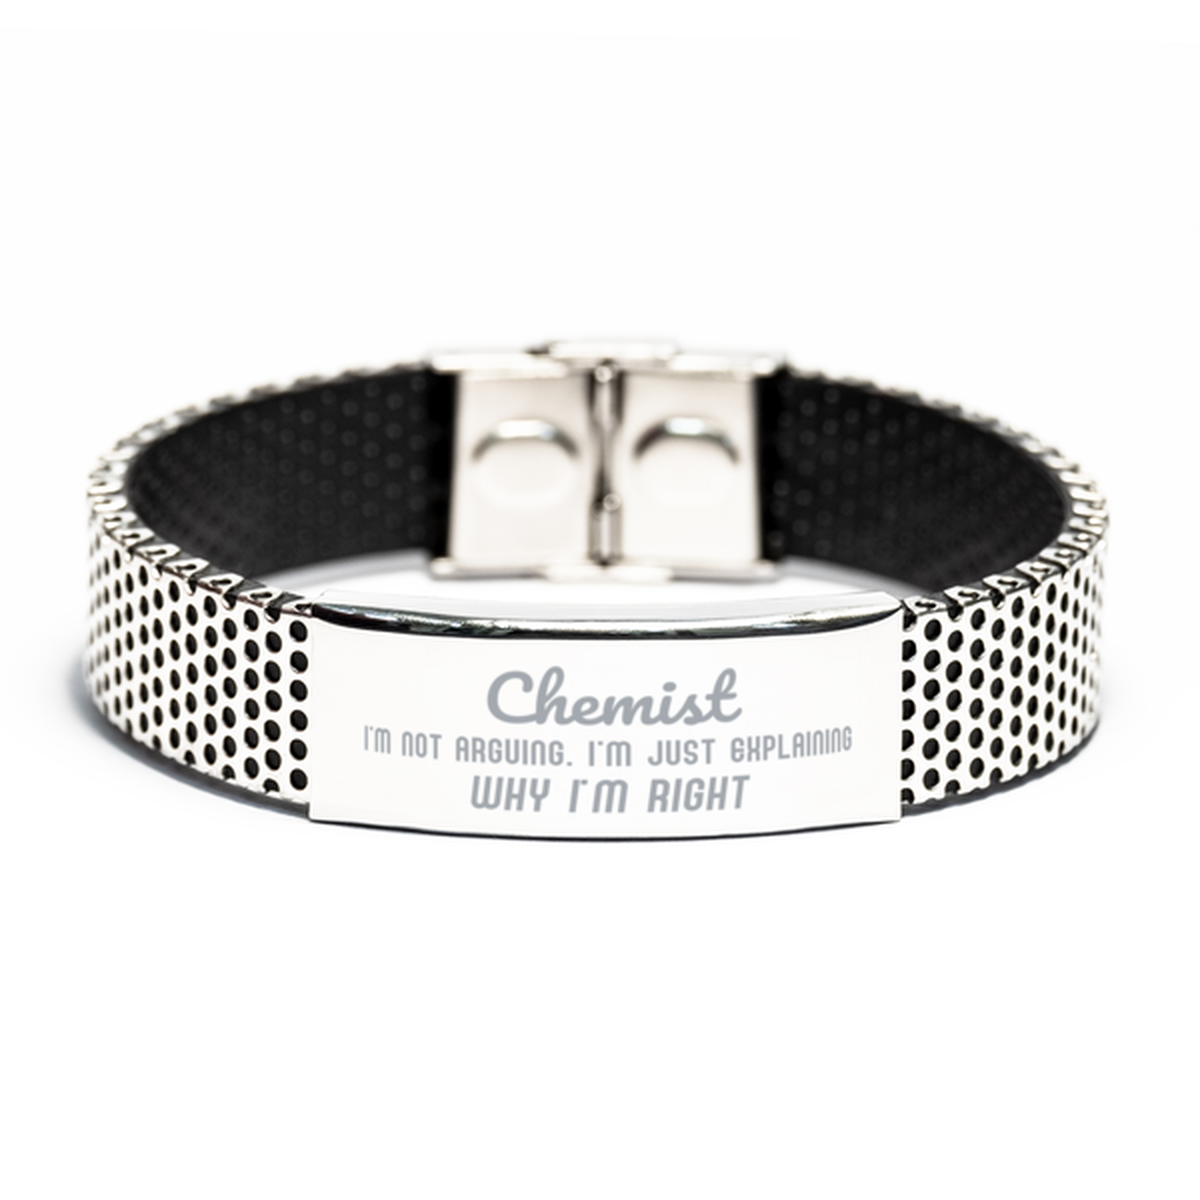 Chemist I'm not Arguing. I'm Just Explaining Why I'm RIGHT Stainless Steel Bracelet, Funny Saying Quote Chemist Gifts For Chemist Graduation Birthday Christmas Gifts for Men Women Coworker